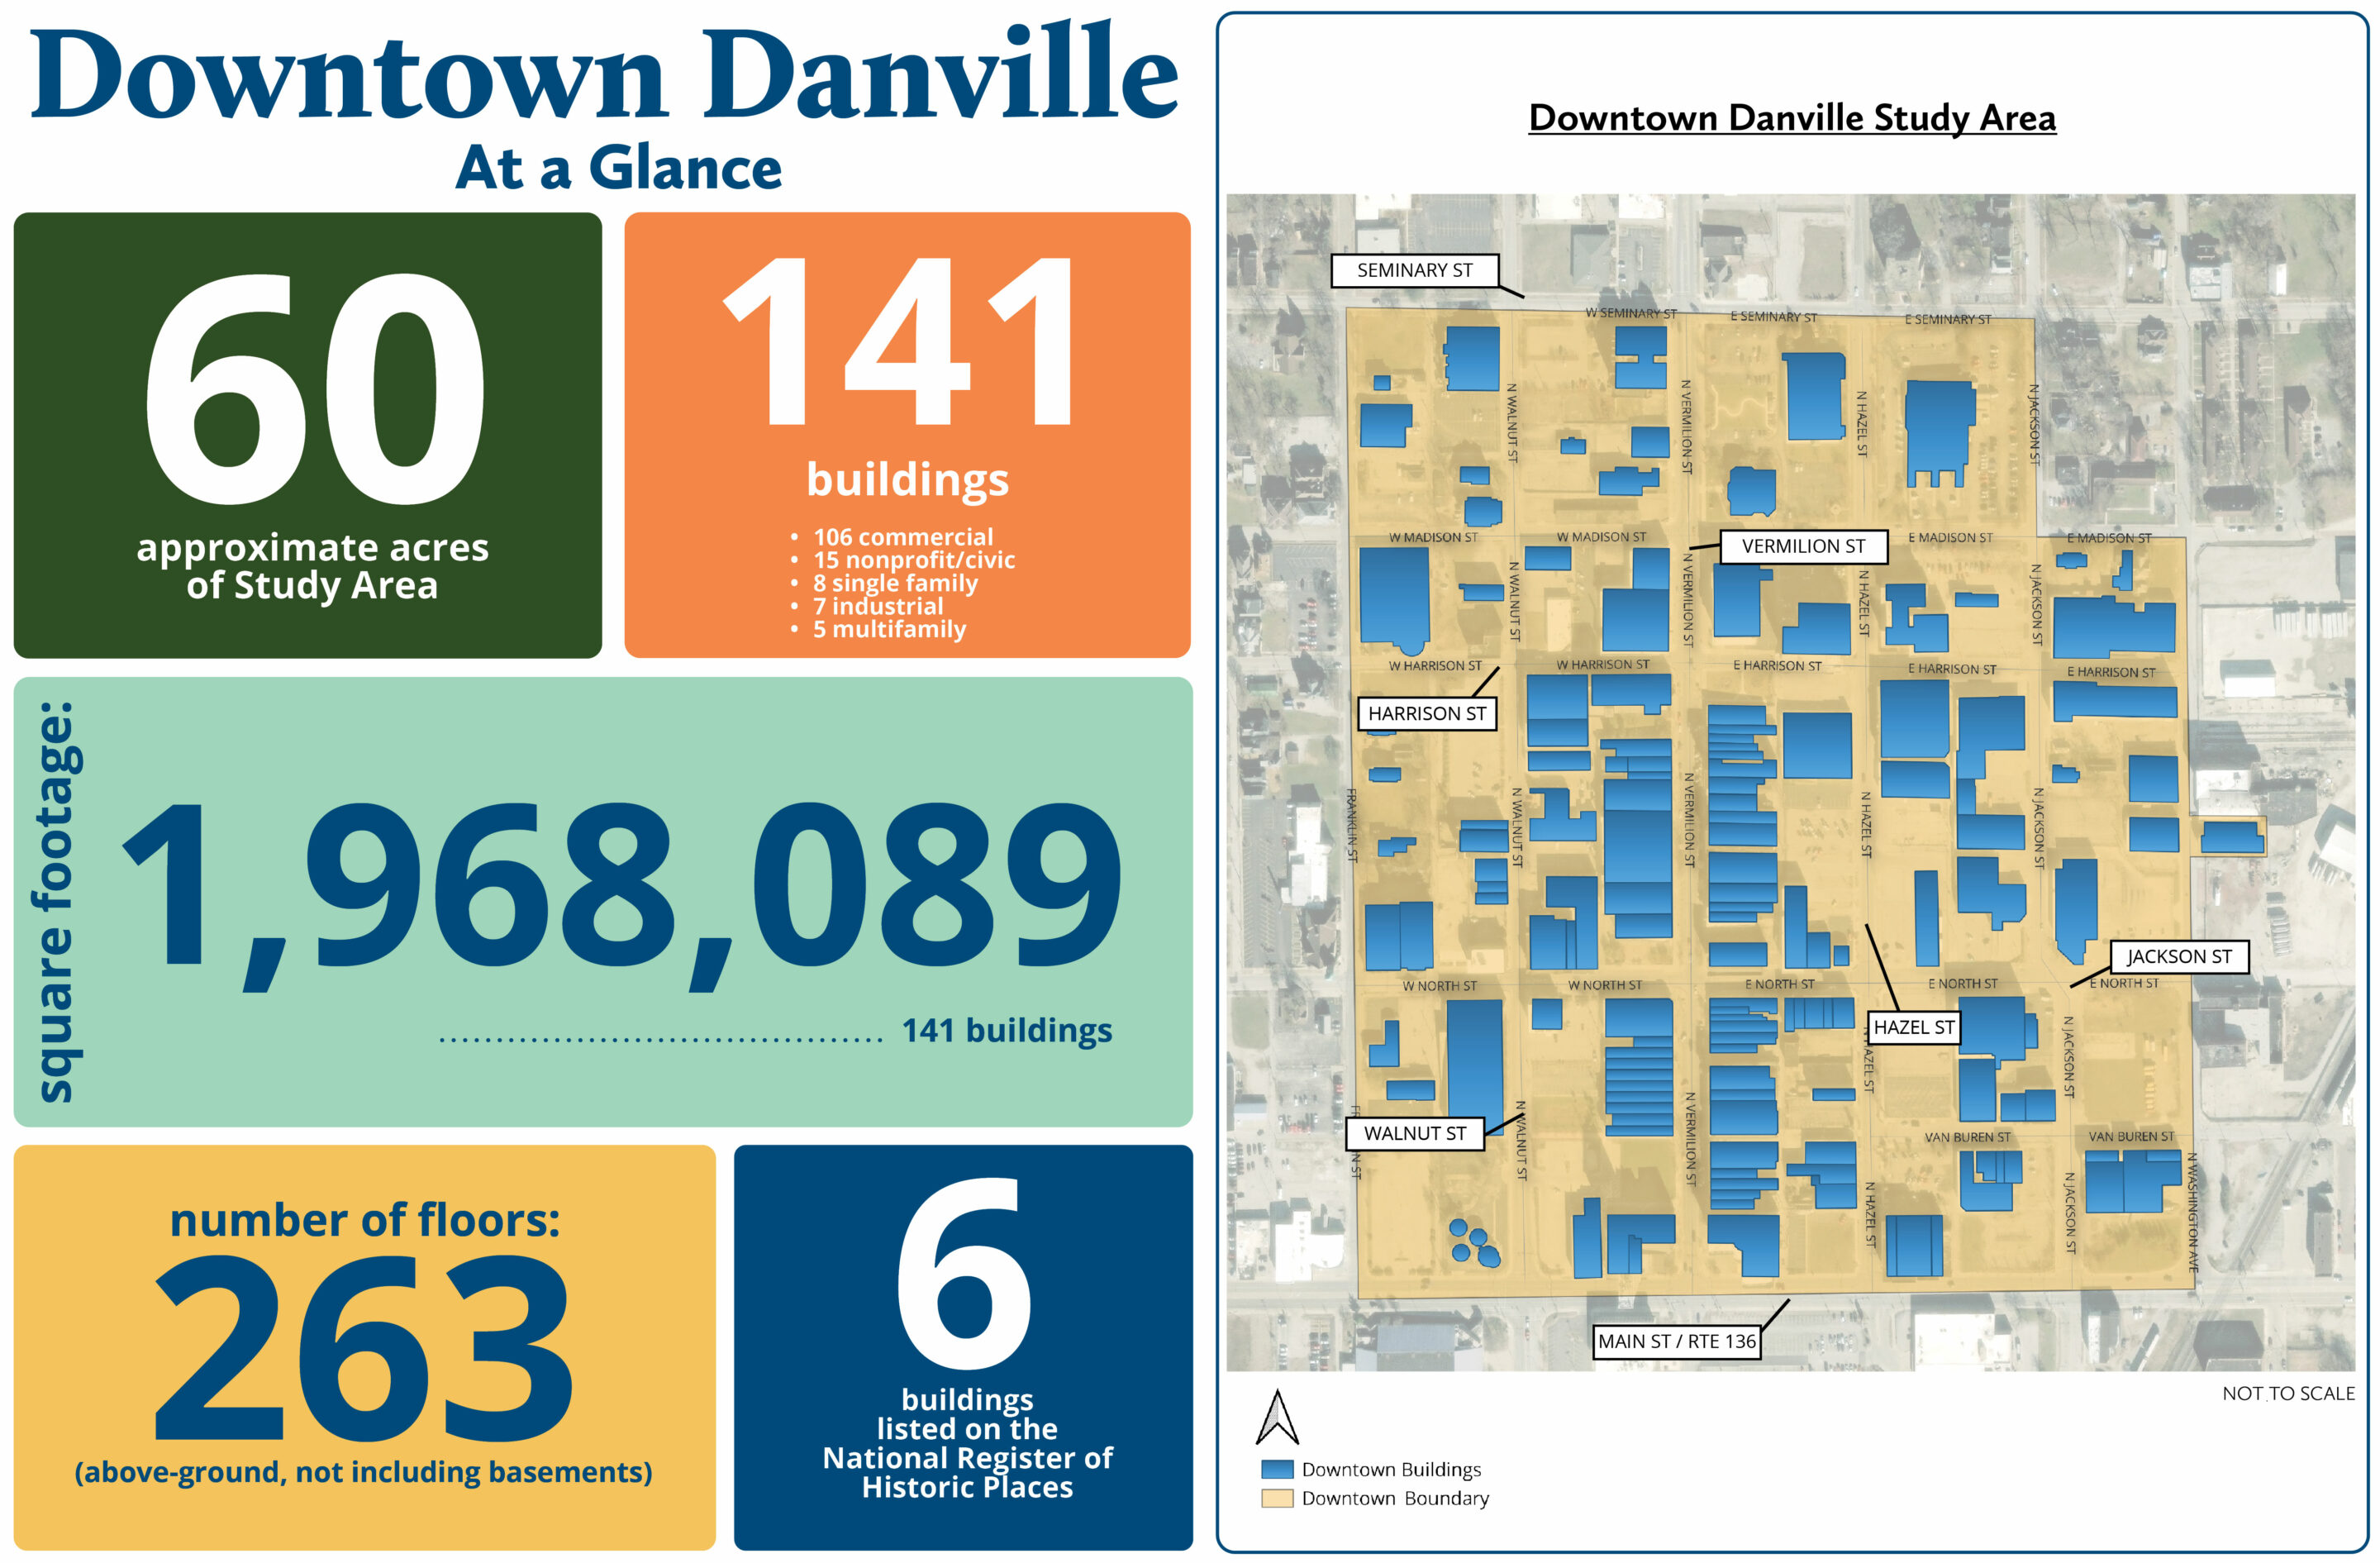 Infographic and map summarizing the Downtown Danville Study Area.